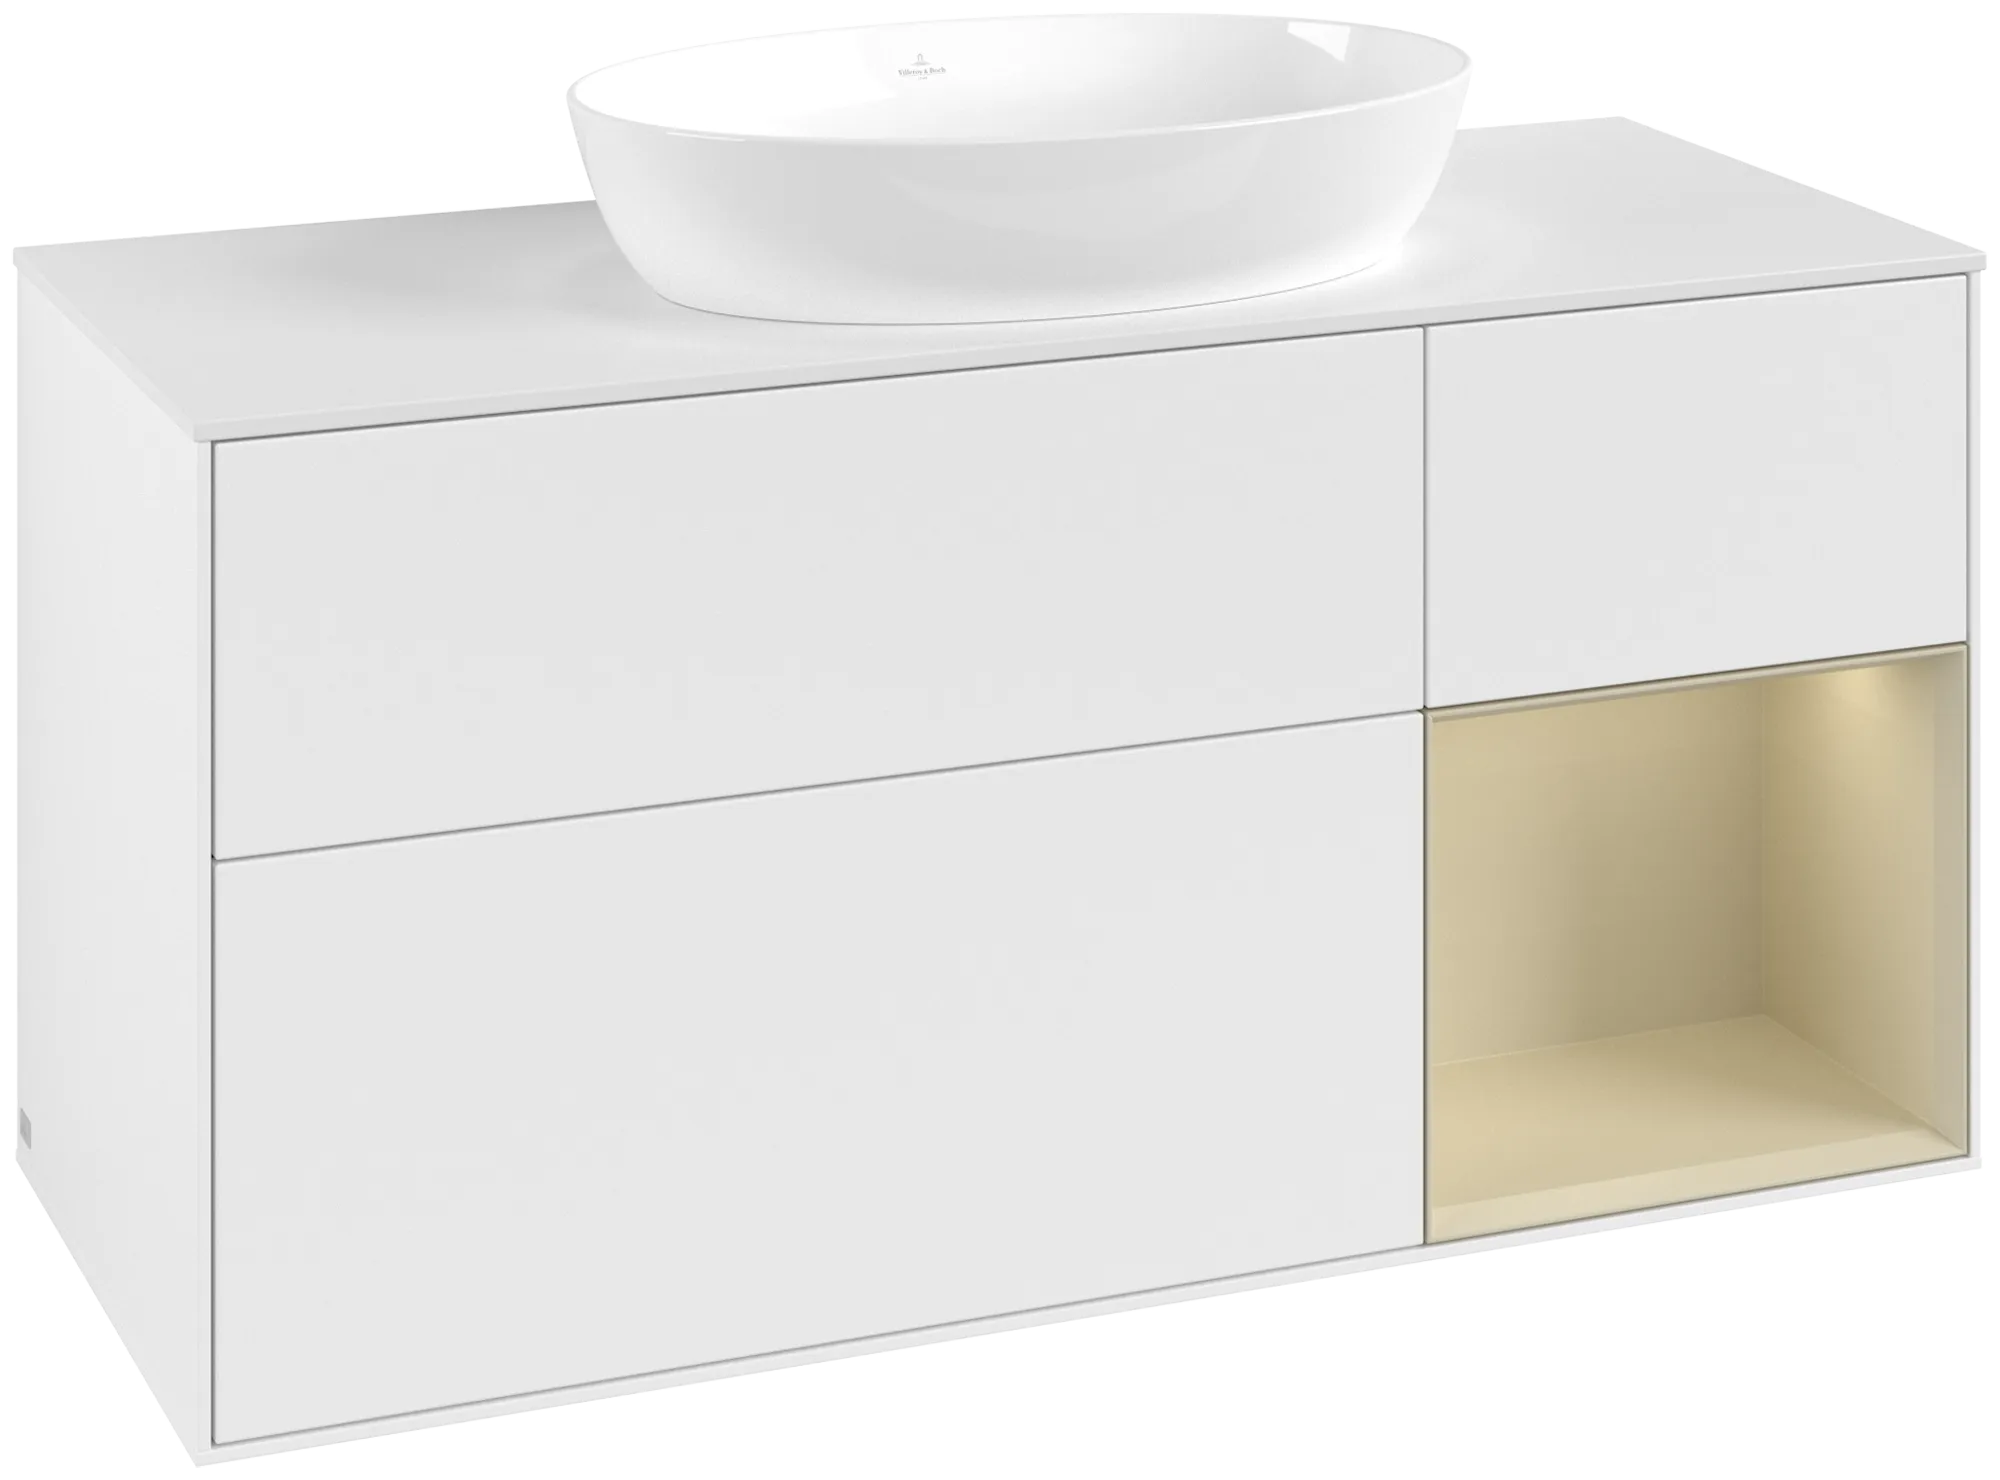 Obrázek VILLEROY BOCH Finion Vanity unit, with lighting, 3 pull-out compartments, 1200 x 603 x 501 mm, White Matt Lacquer / Silk Grey Matt Lacquer / Glass White Matt #GA71HJMT